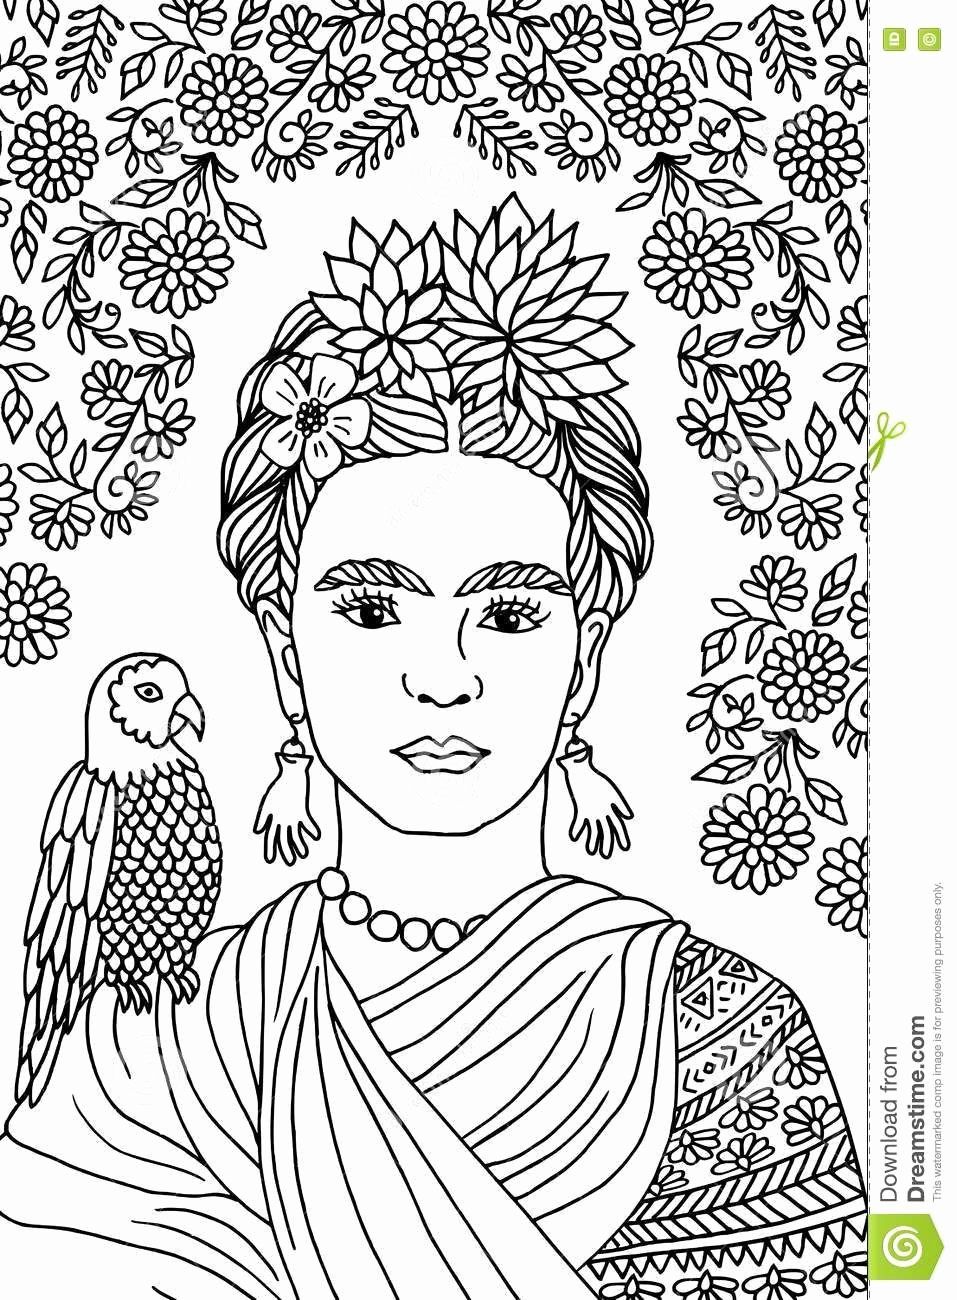 Frida kahlo coloring page luxury related image frida kahlo in hand drawn portraits how to draw hands drawings